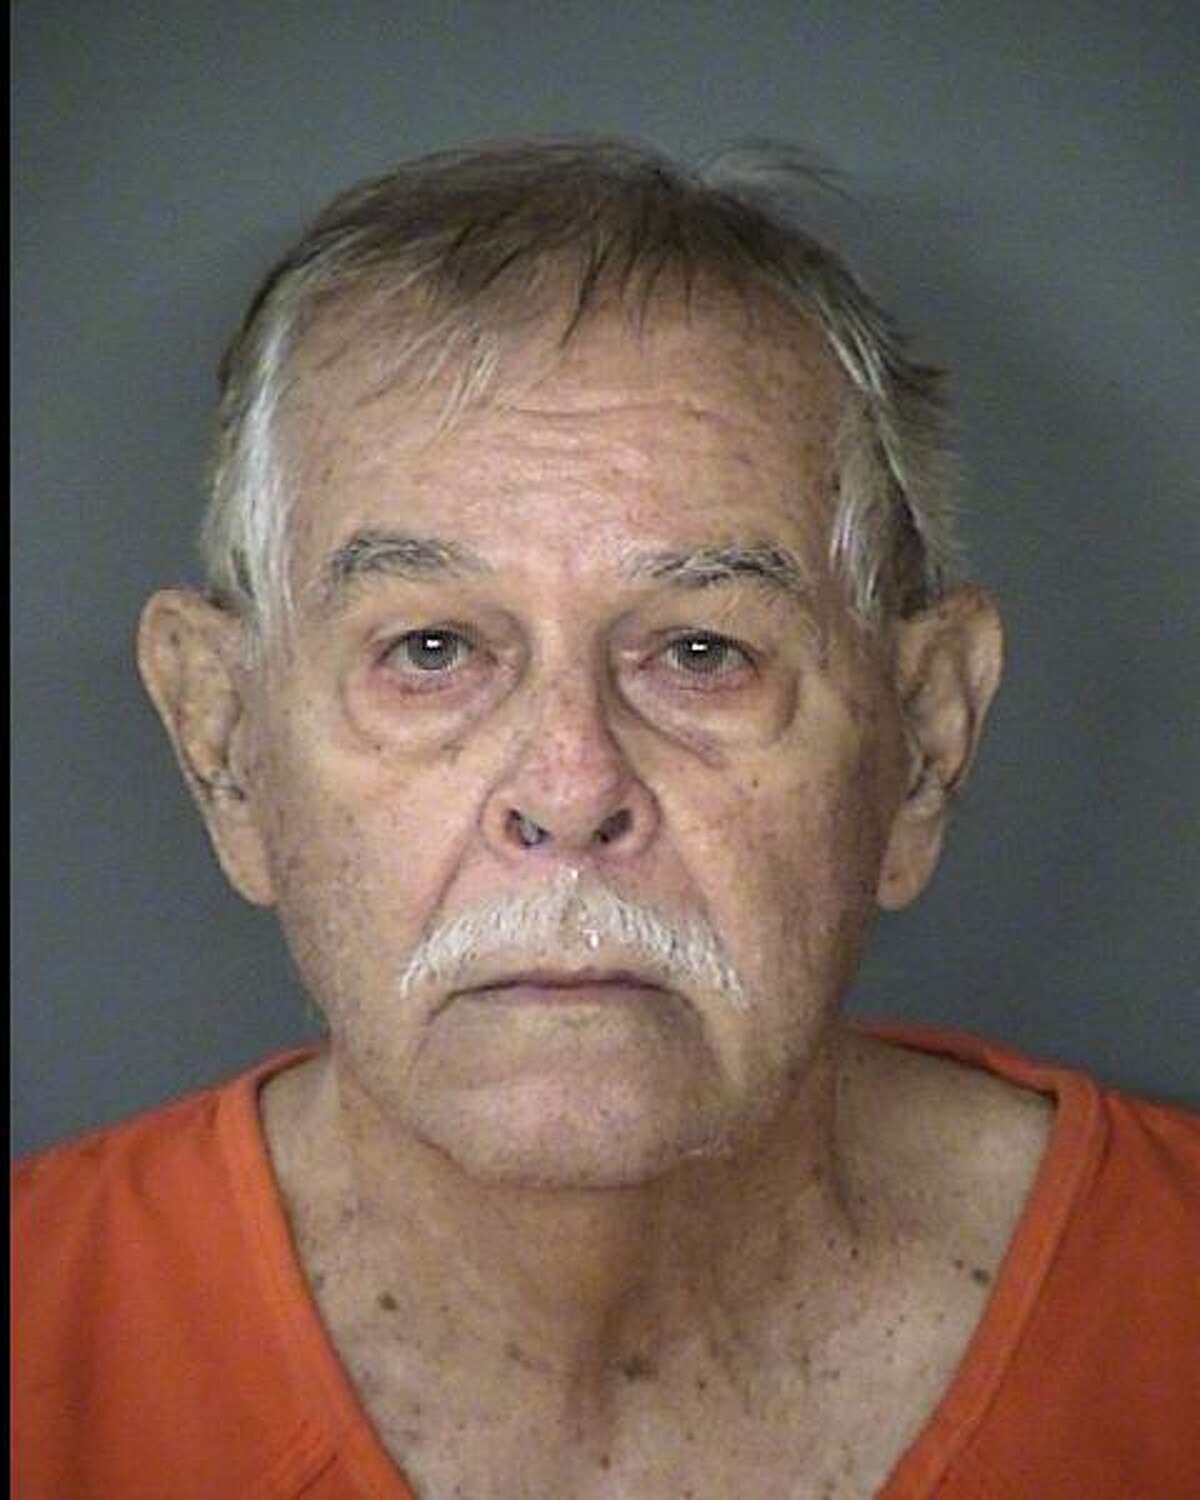 Donald Martin, 77, was arrested Tuesday, Nov. 20, 2018, and charged with cruelty to a non-livestock animal. Martin allegedly stood on a balcony and fired shots at a group of cats, fatally injuring one on Nov. 12 at the Spanish Oaks Apartments, 3206 Cripple Creek, according to Animal Care Services.